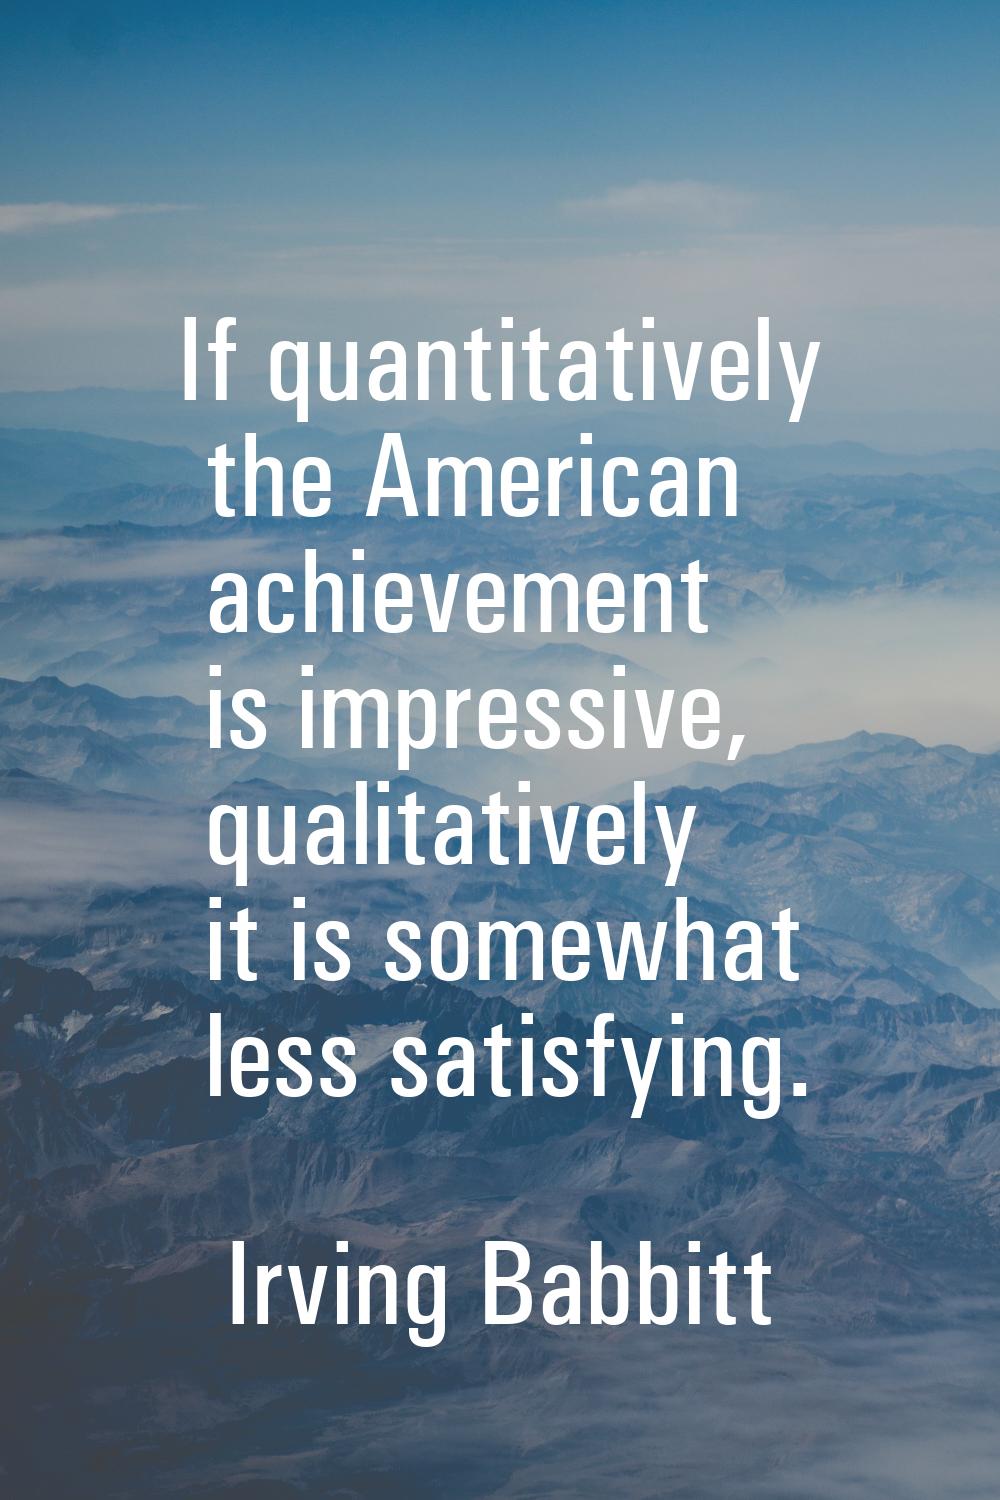 If quantitatively the American achievement is impressive, qualitatively it is somewhat less satisfy